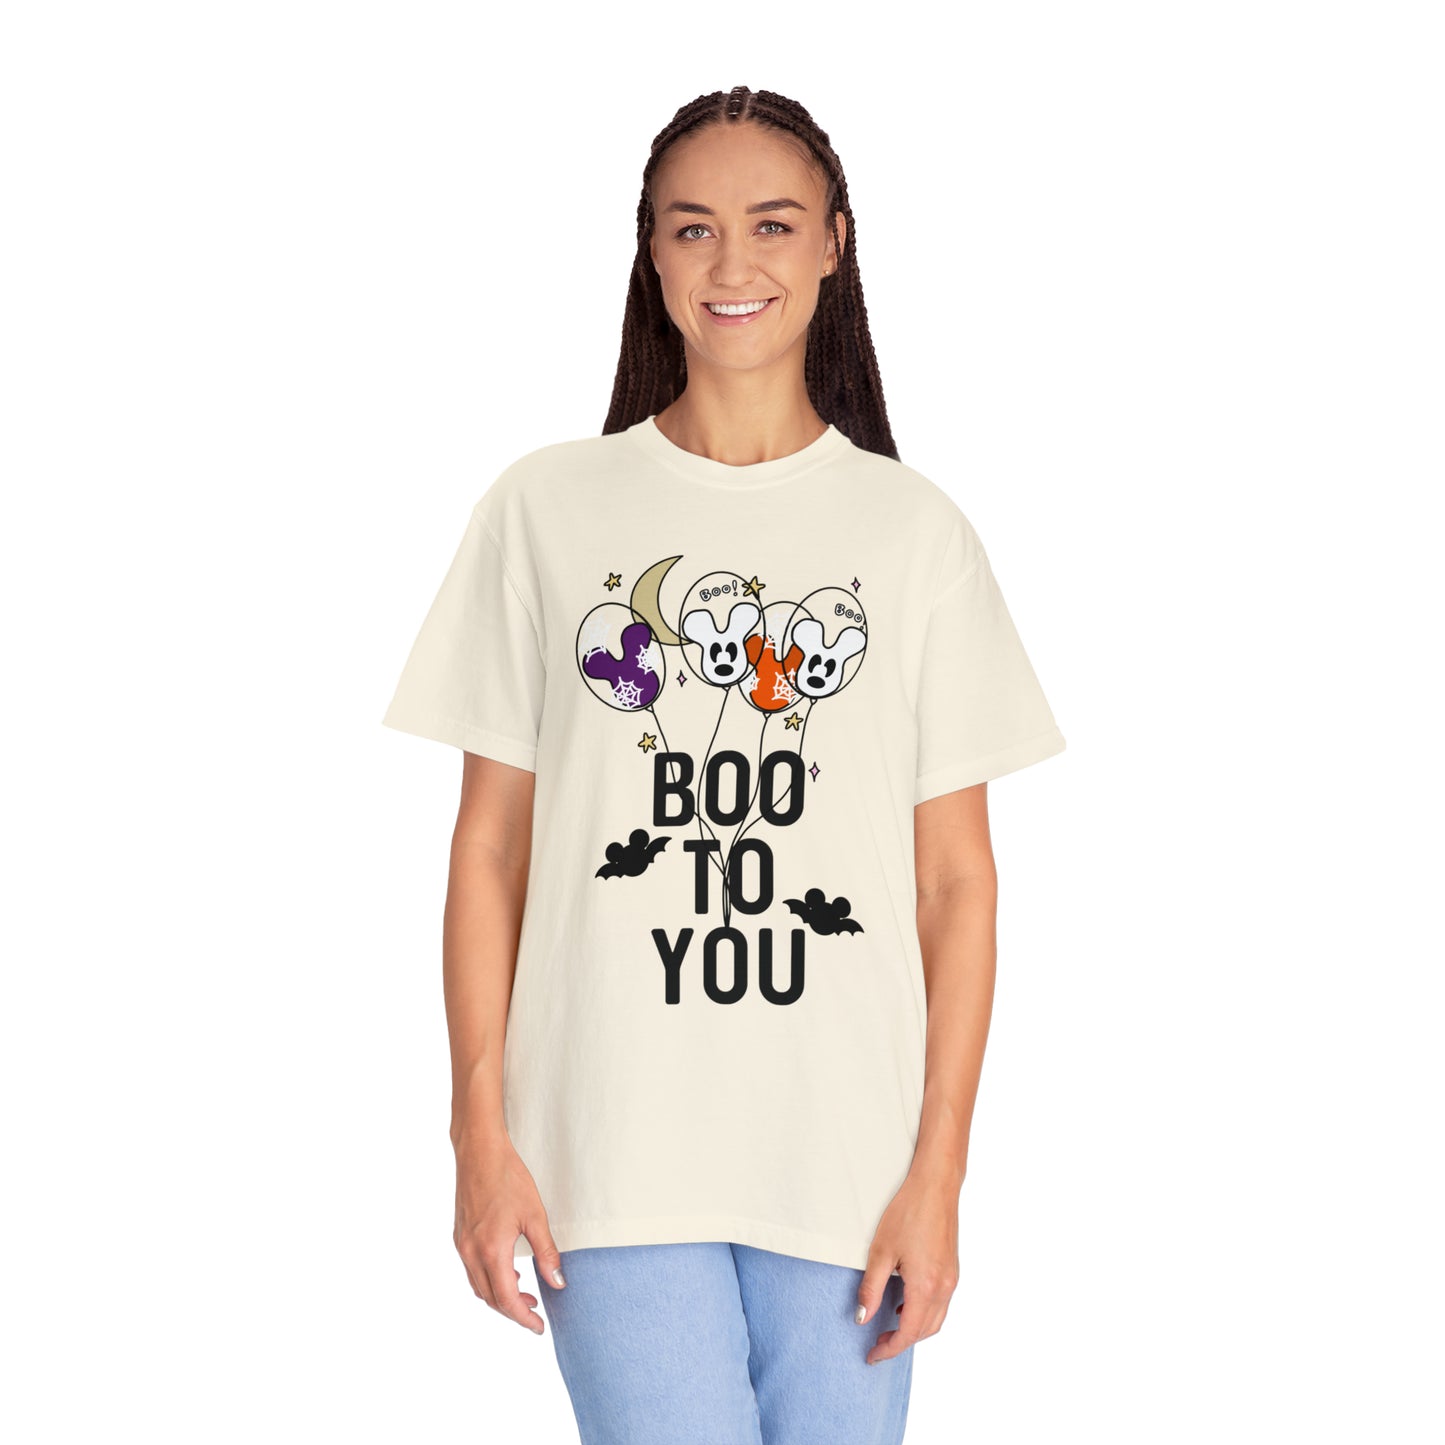 Adult Boo to you Tee - Comfort Colors